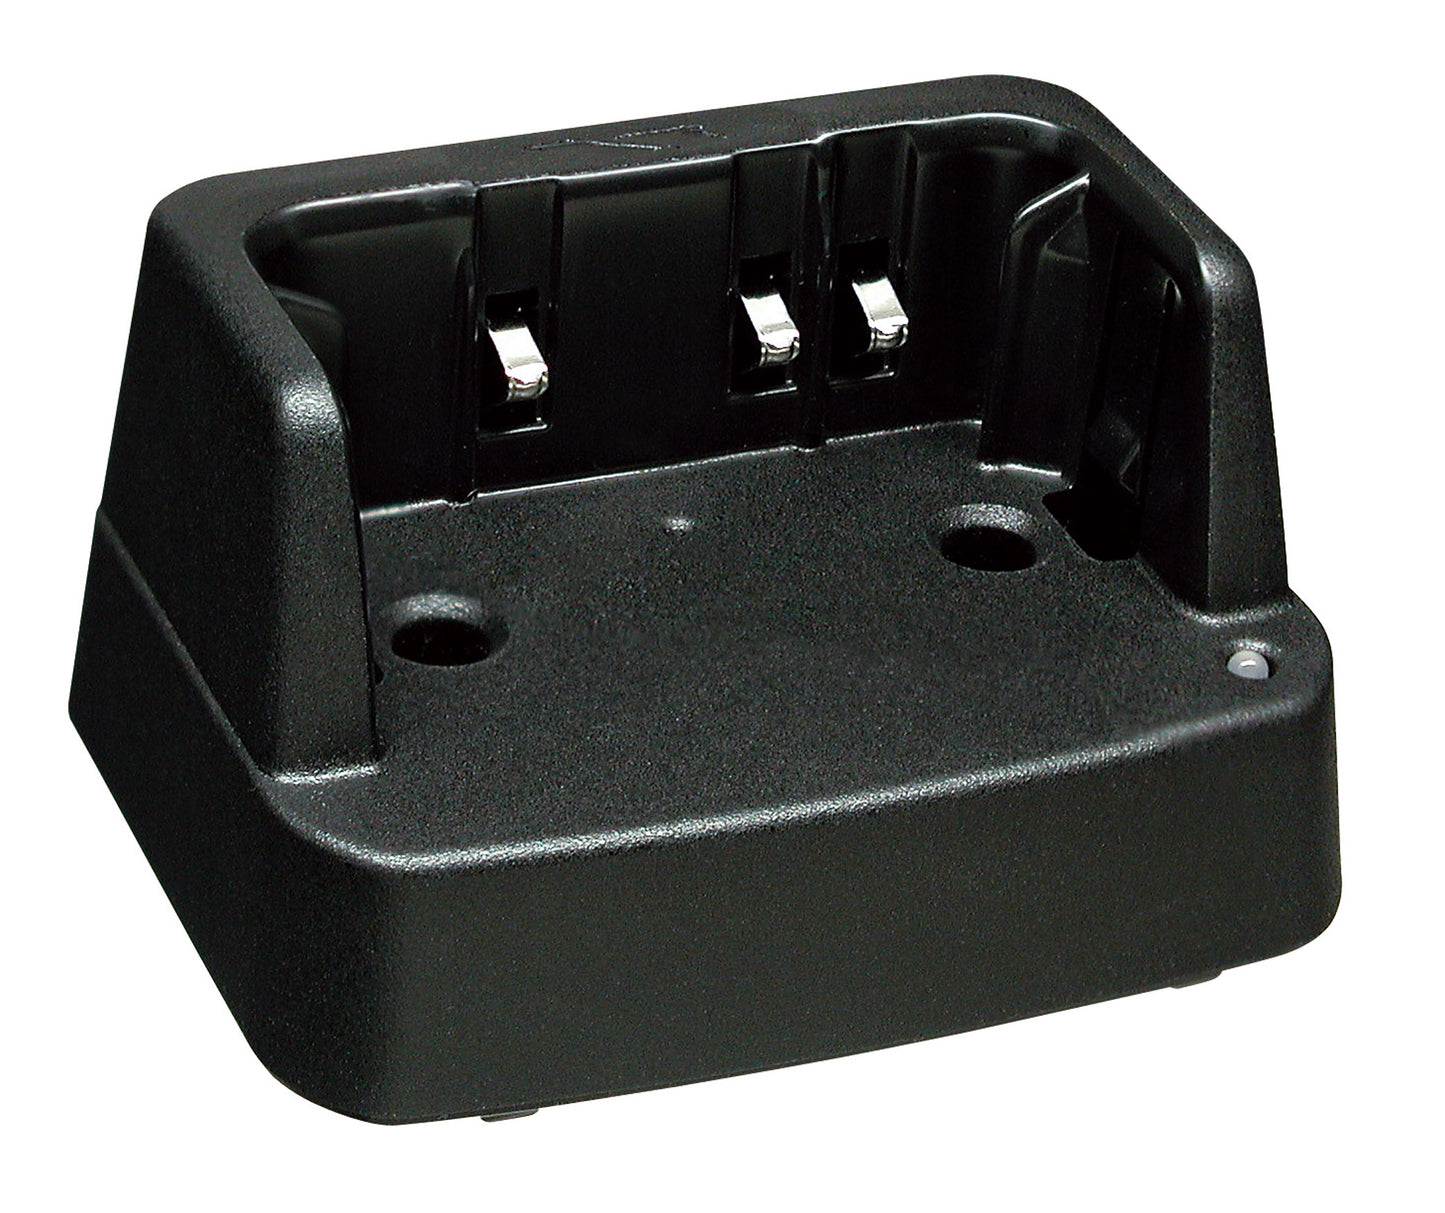 Standard Cd-48 Charging Cradle For Hx380